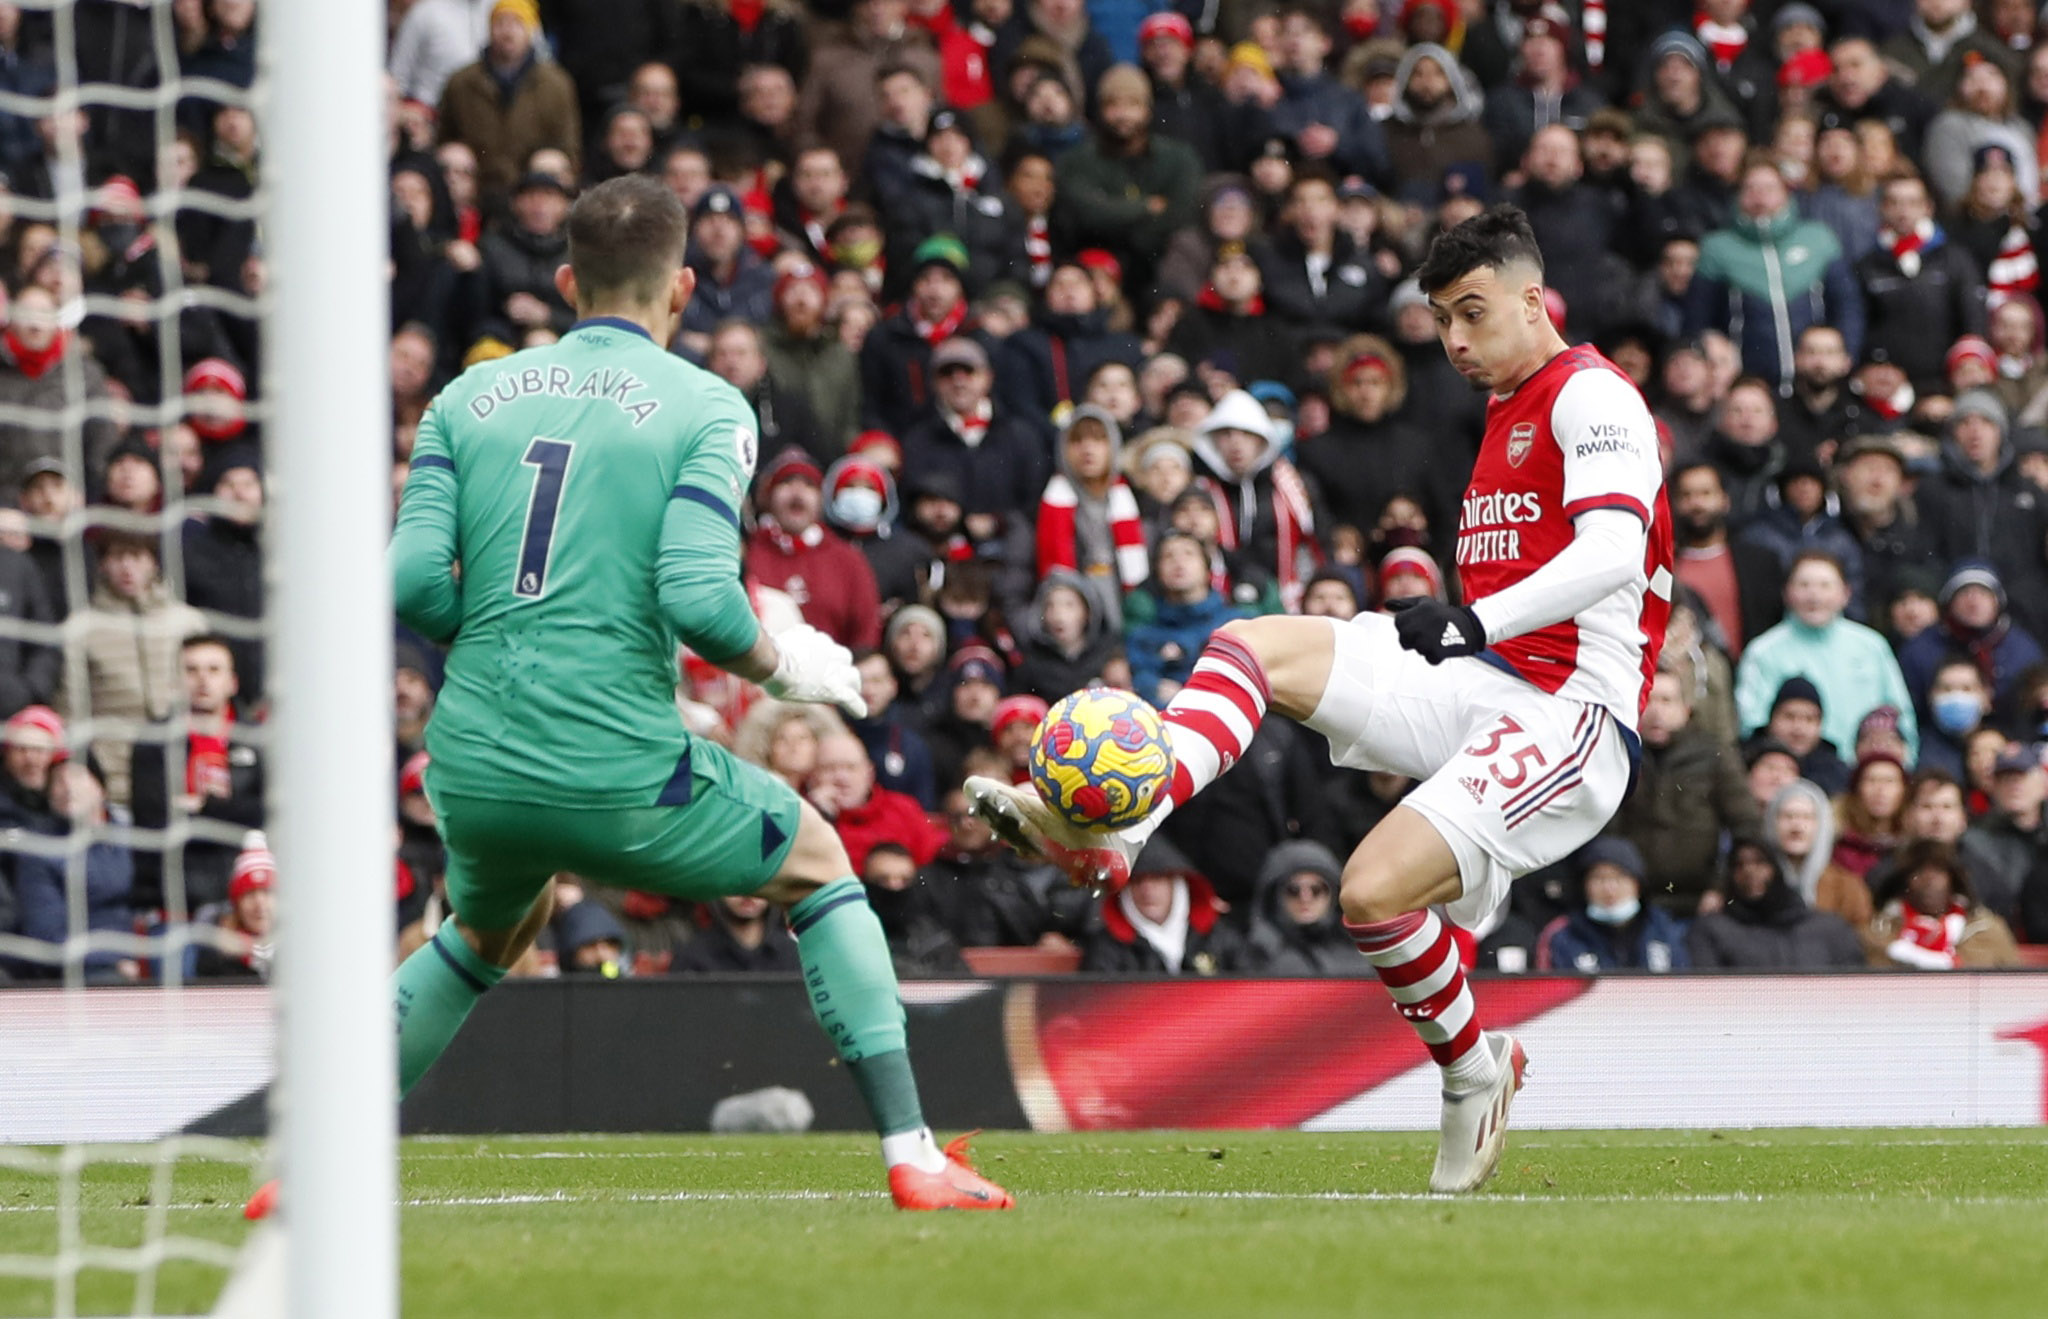 Soccer Football - Premier League - Arsenal v Newcastle United - Emirates Stadium, London, Britain - November 27, 2021 Arsenal's Gabriel Martinelli scores their second goal Action Images via Reuters/Paul Childs  